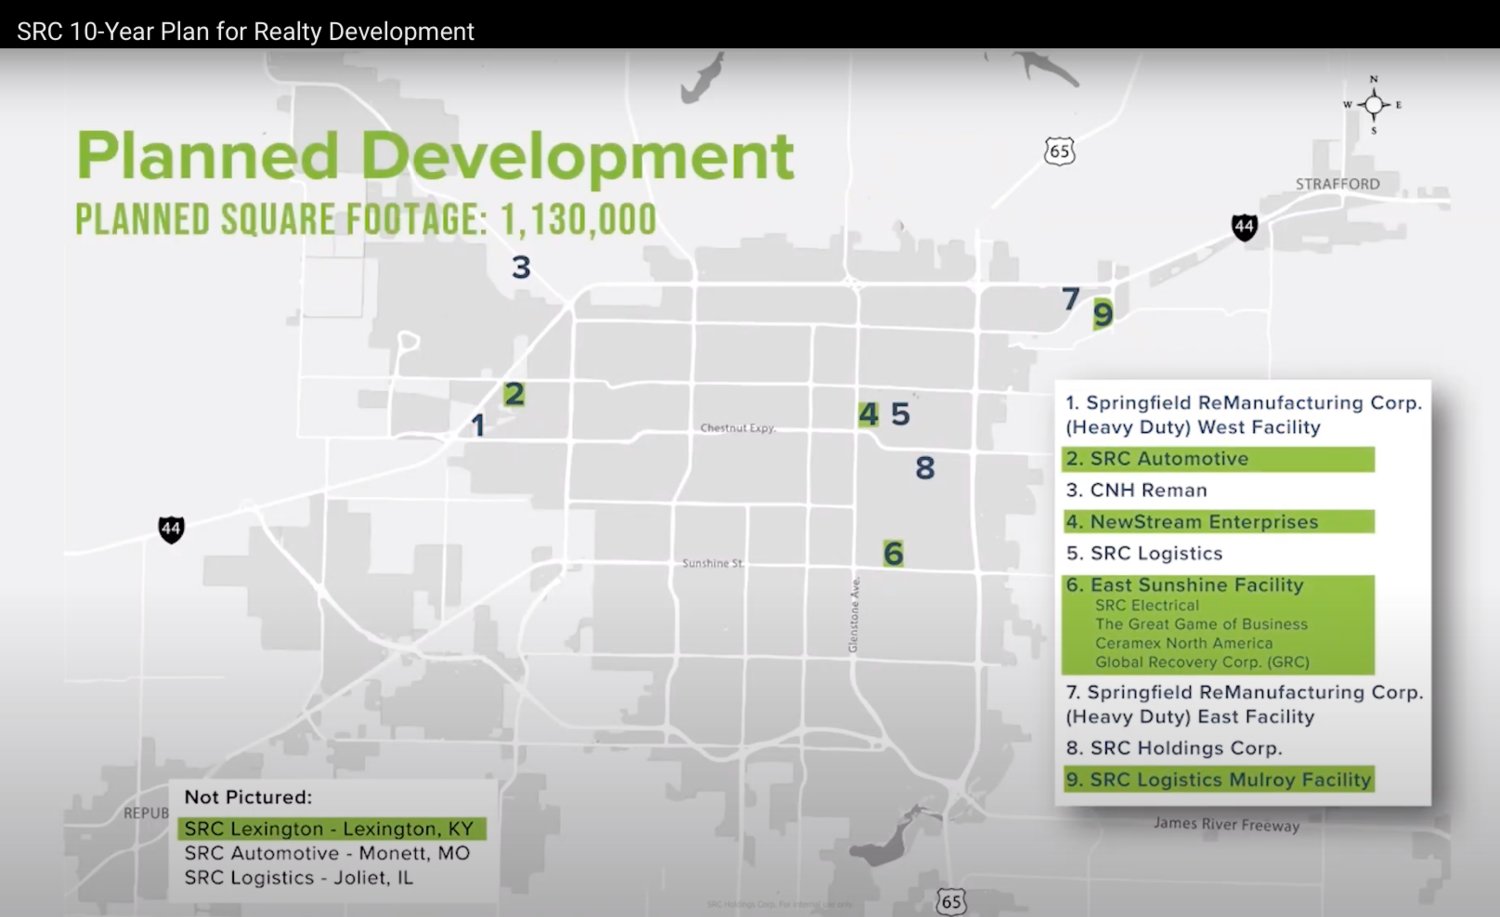 Screenshots of SRC's 10-year plan show glimpses of the 1 million square feet and up to $100 million in potential development.